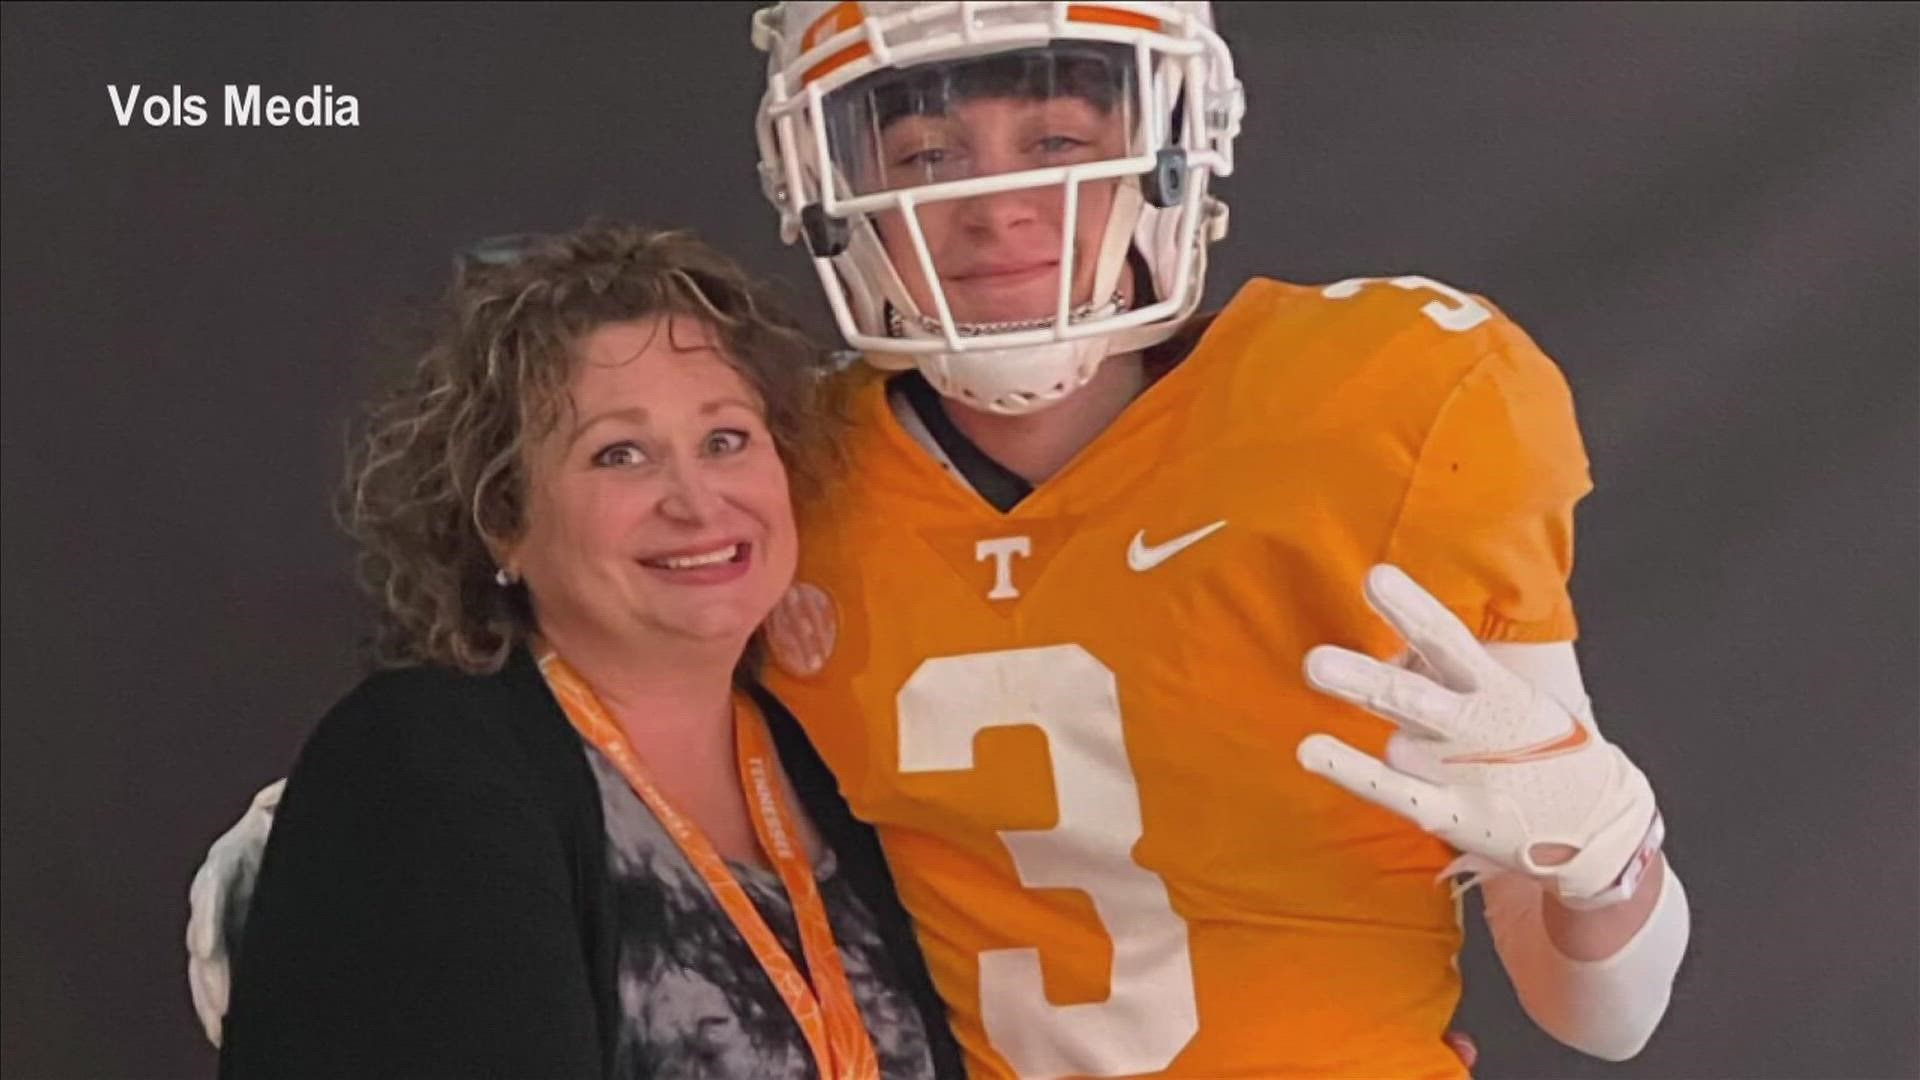 Max Gilbert initially had dreams to be a professional soccer player, now he's headed to play football for Tennessee in the spring.